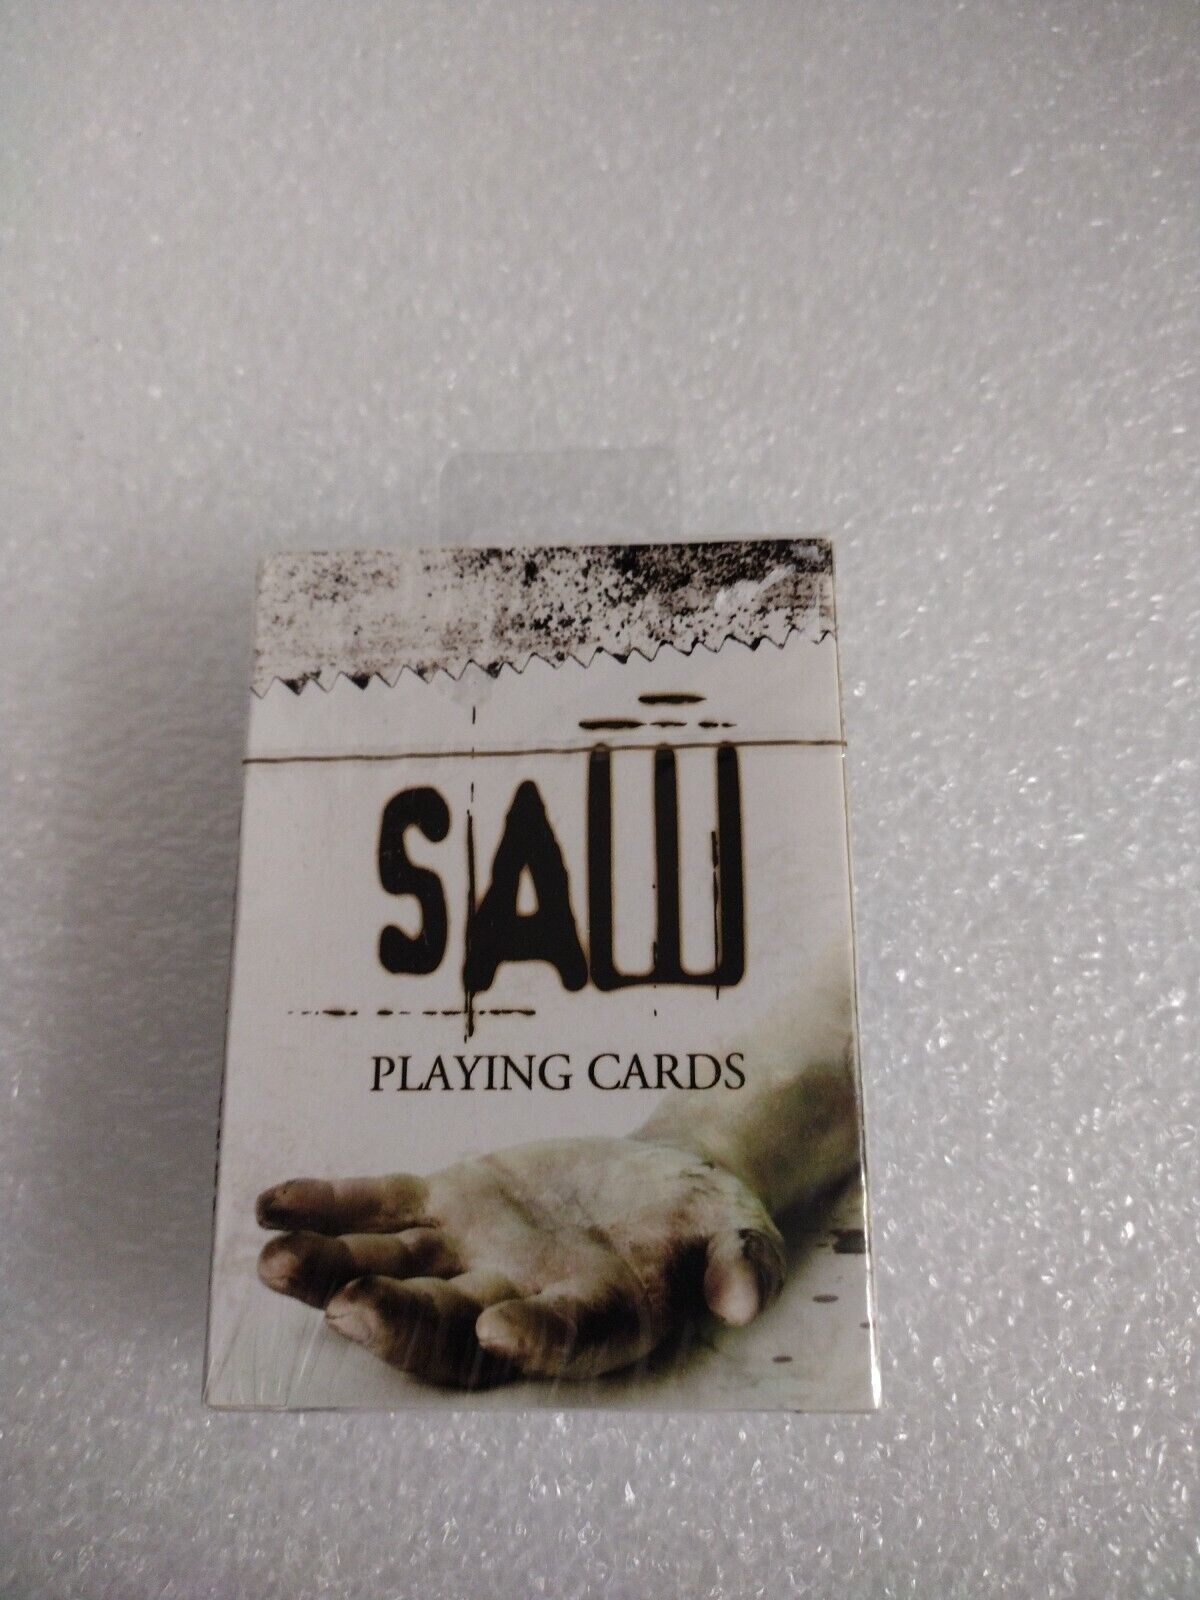 Official Saw IV Movie Promo Playing Card Deck Brand-new Unopened